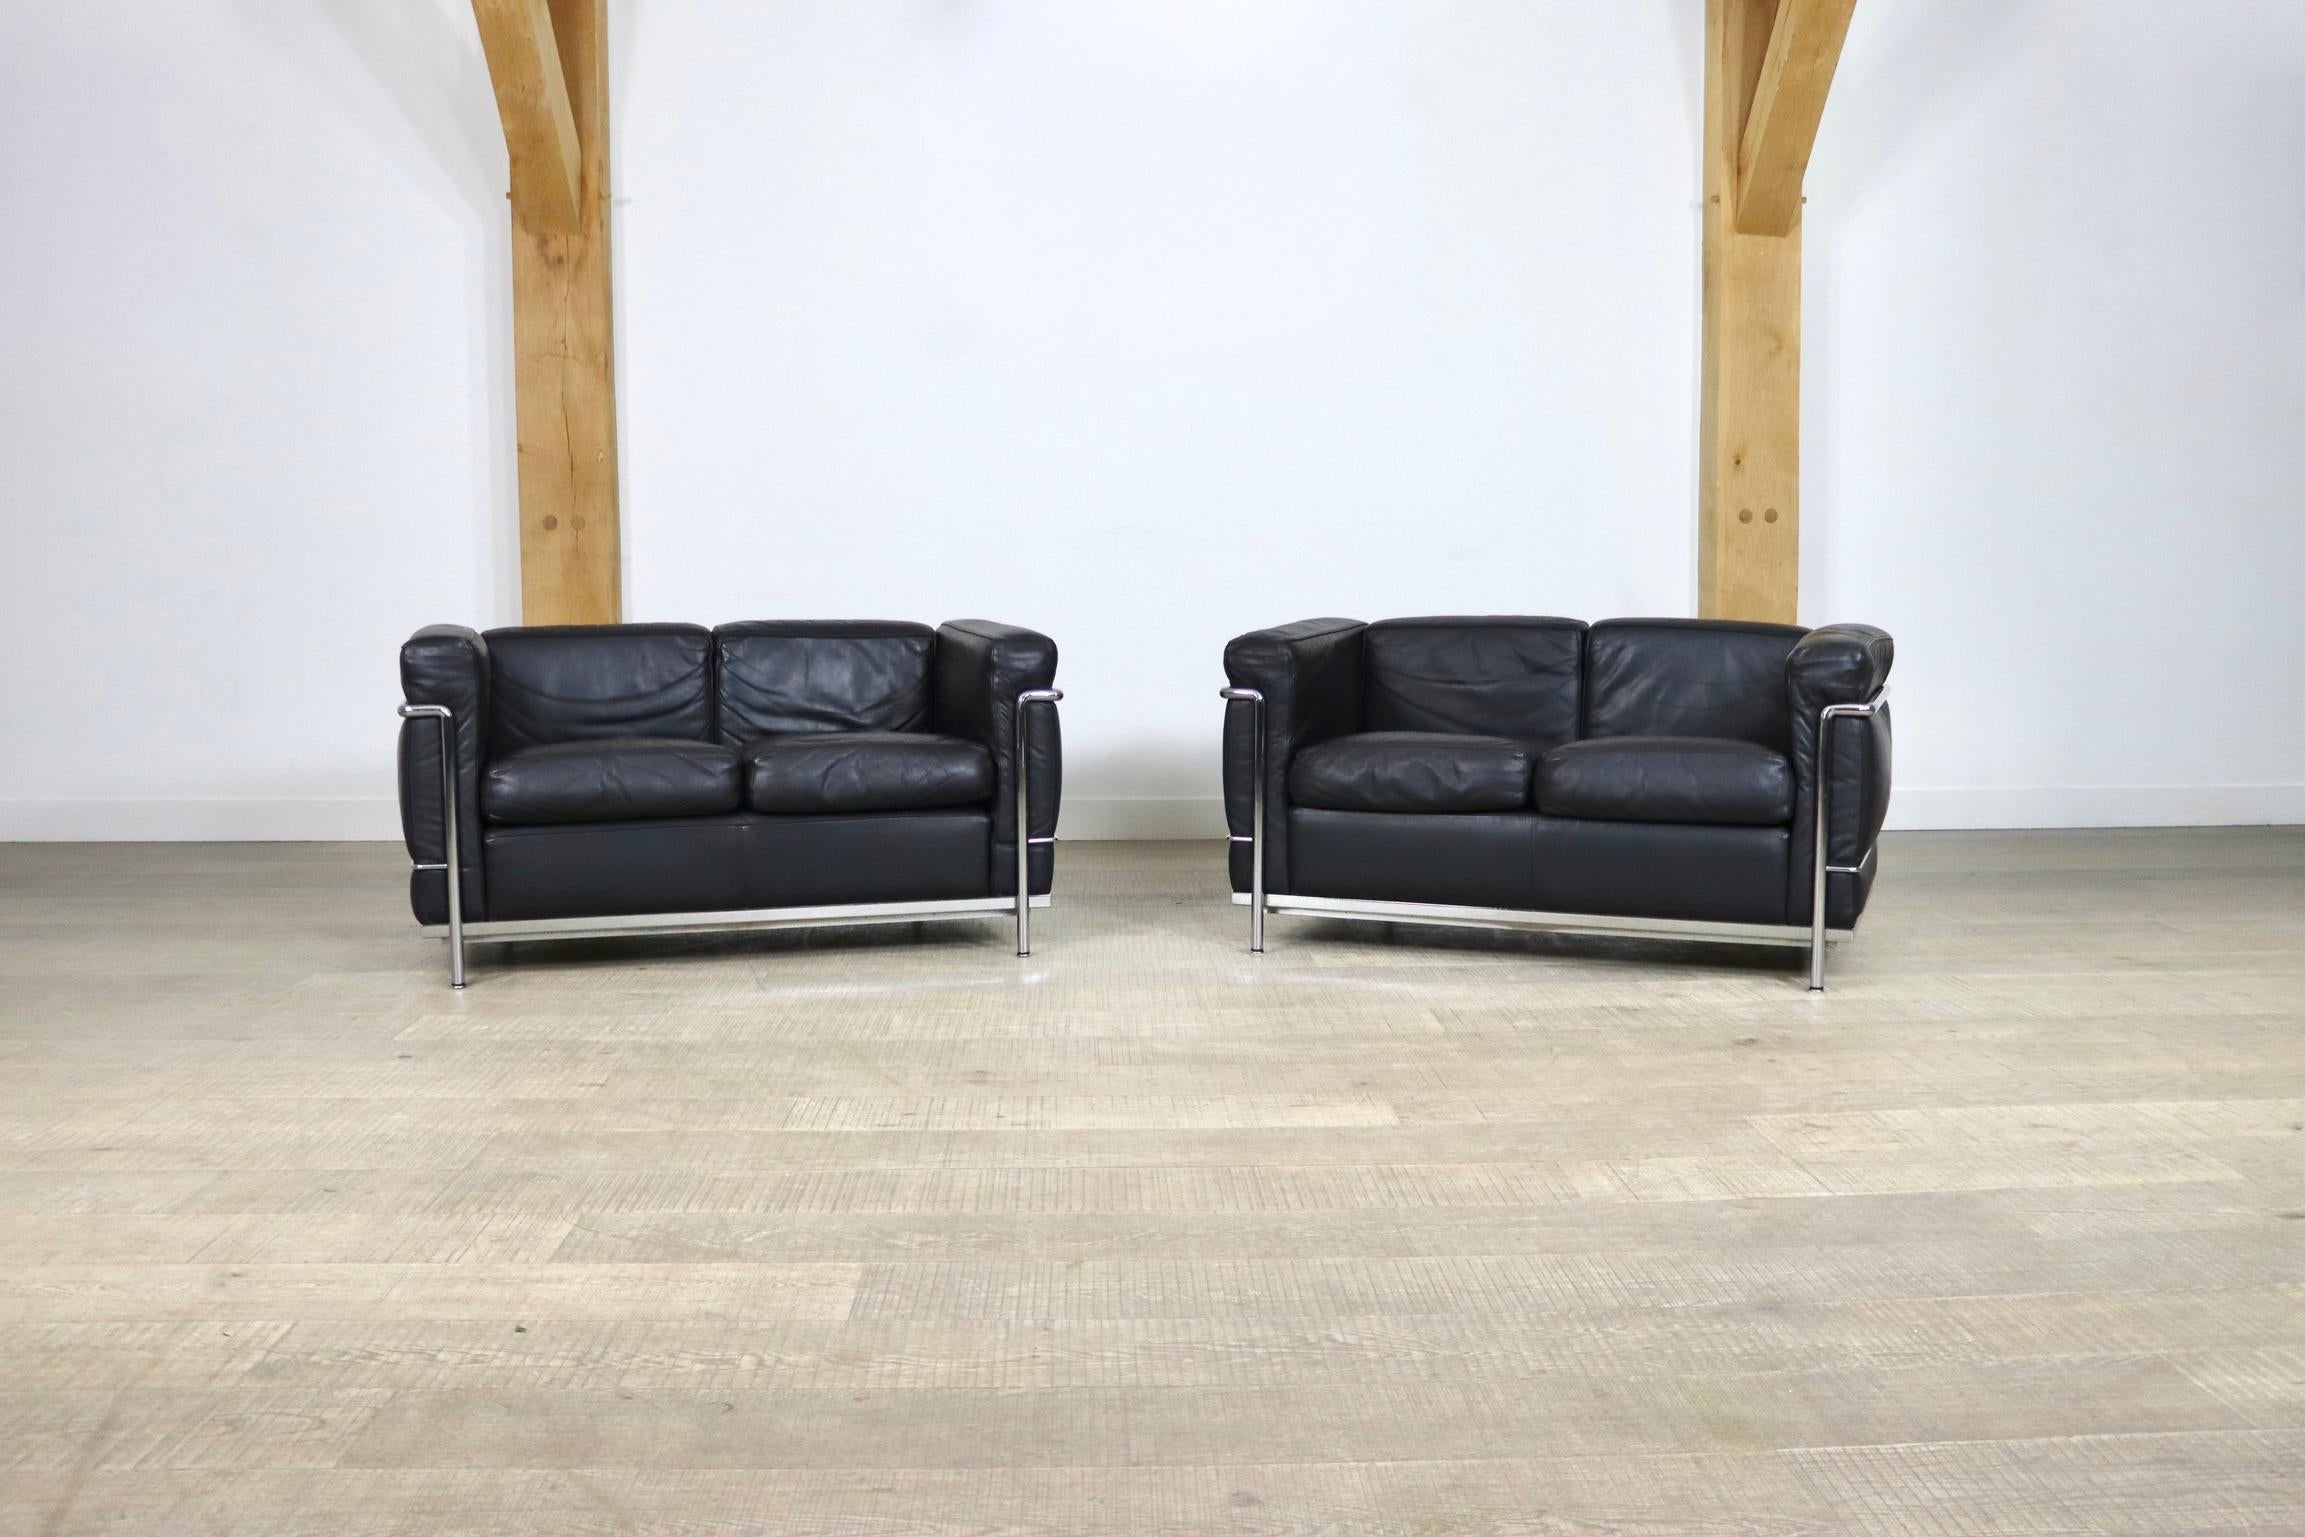 Amazing pair of LC2 two seater sofas, a true design classic by Le Corbusier, Pierre Jeanneret and Charlotte Perriand, originally designed in 1928. The modern sofa is composed of a tubular chrome frame and high-end black leather cushions. Both sofas